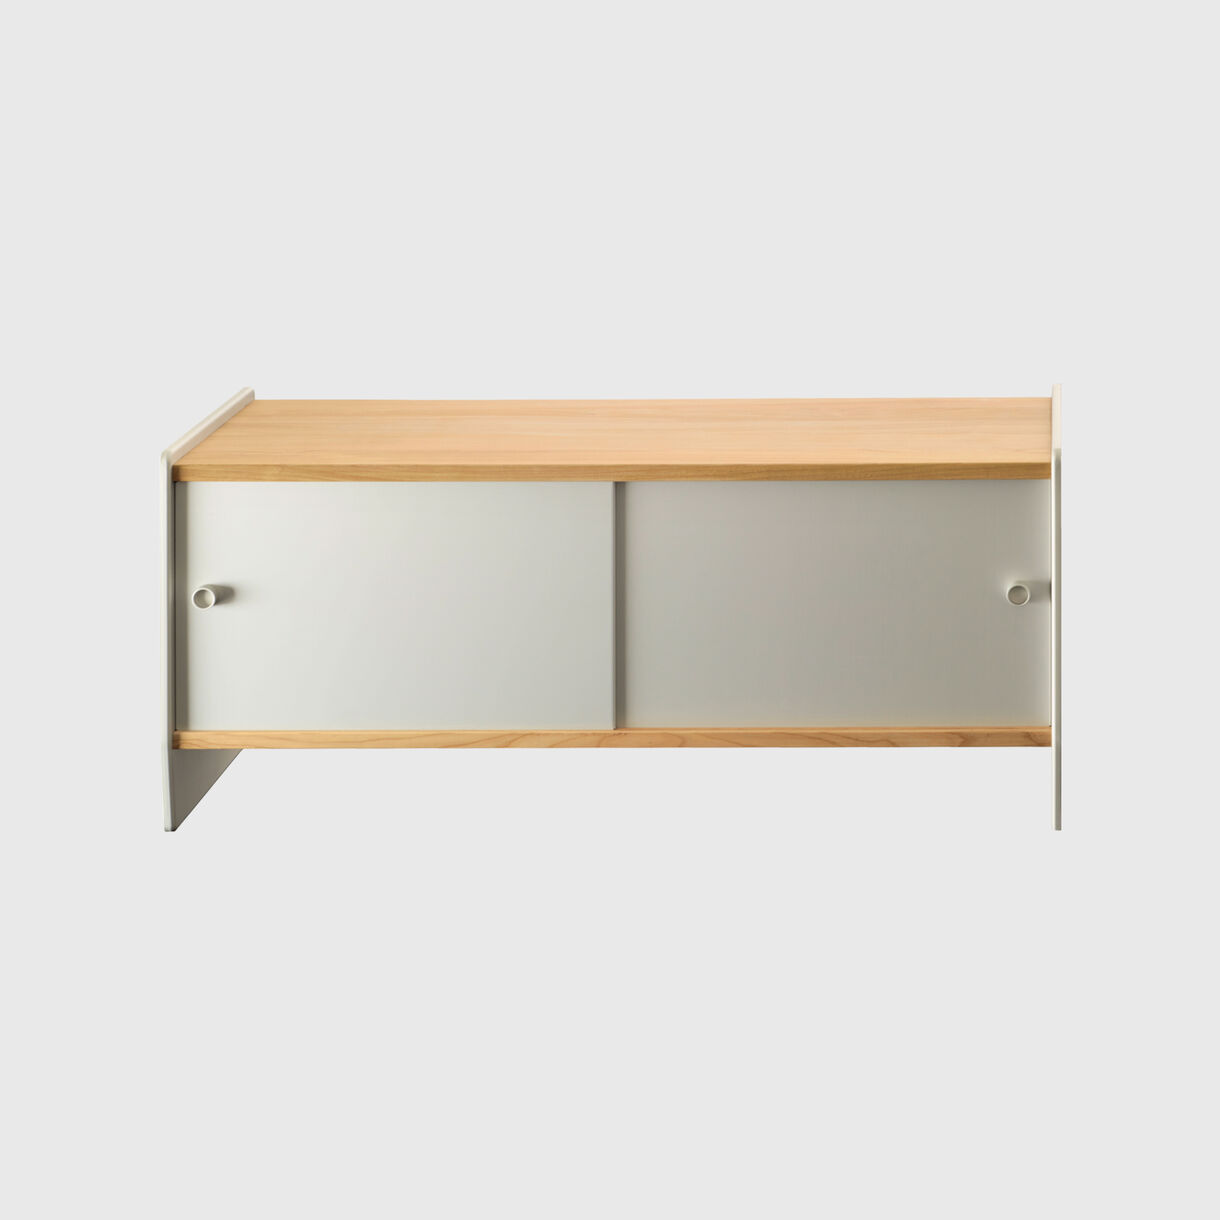 Theca sideboard